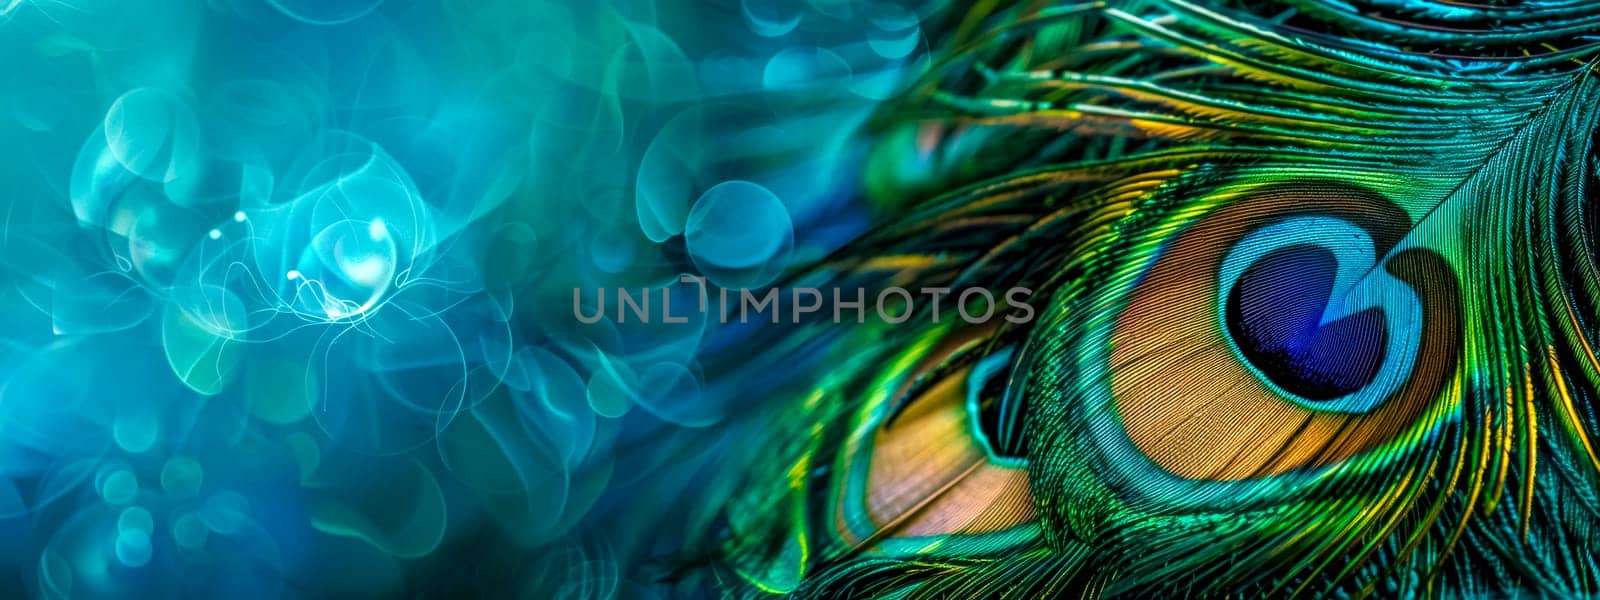 Vibrant peacock feather close-up with bokeh lights by Edophoto